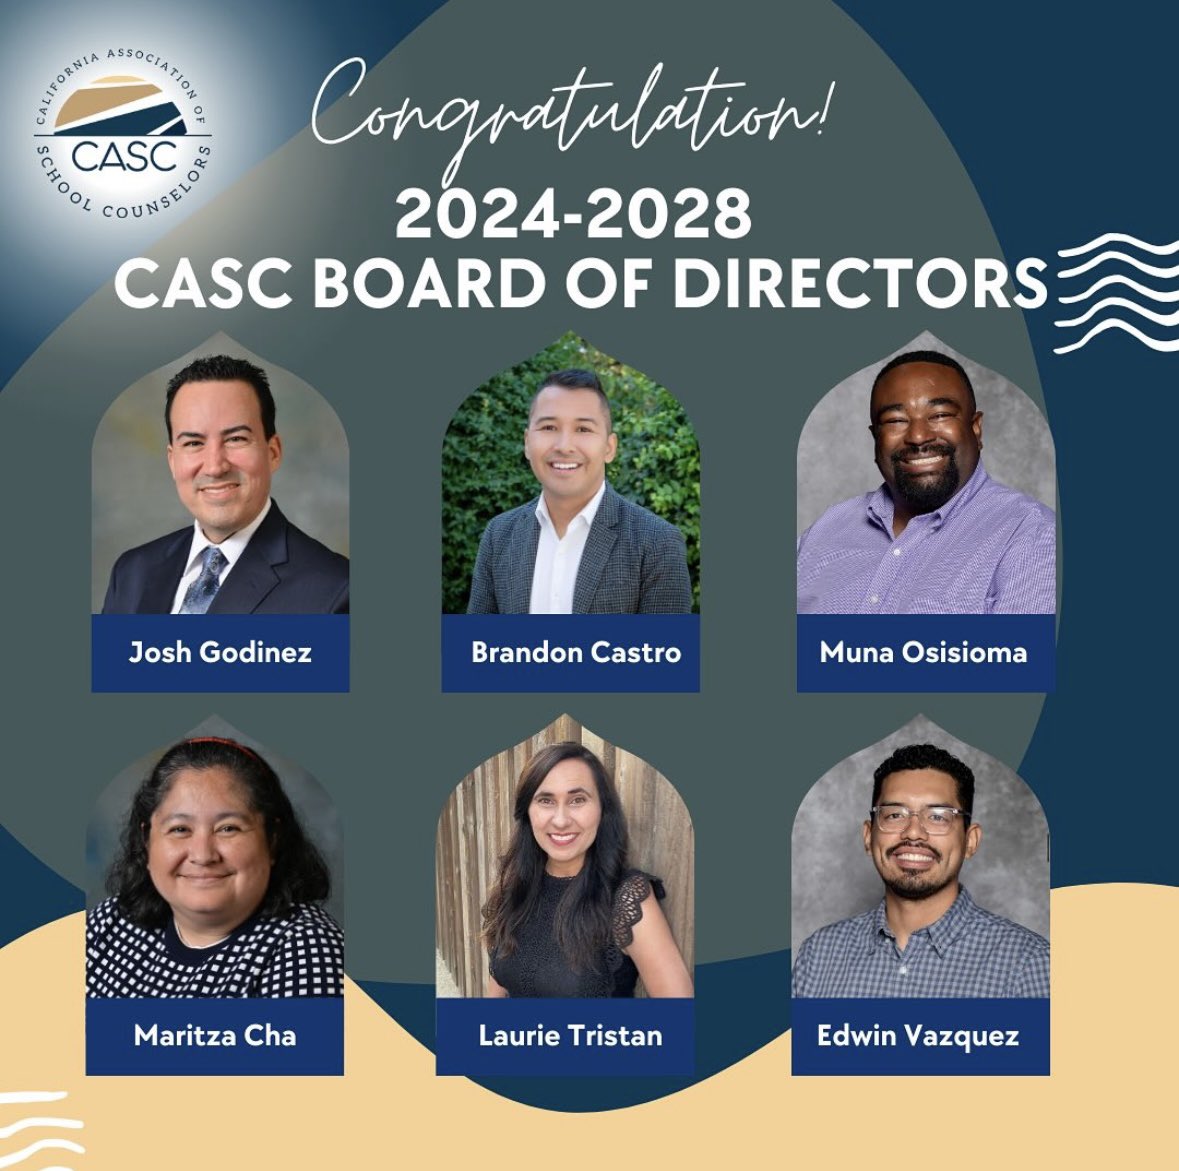 Thank you for electing me on to the @MyCASC Board. I am honored and humbled to be a servant leader for the school counseling profession. I will continue to advocate for school counselors. Most importantly, I want to continue hearing from school counselors